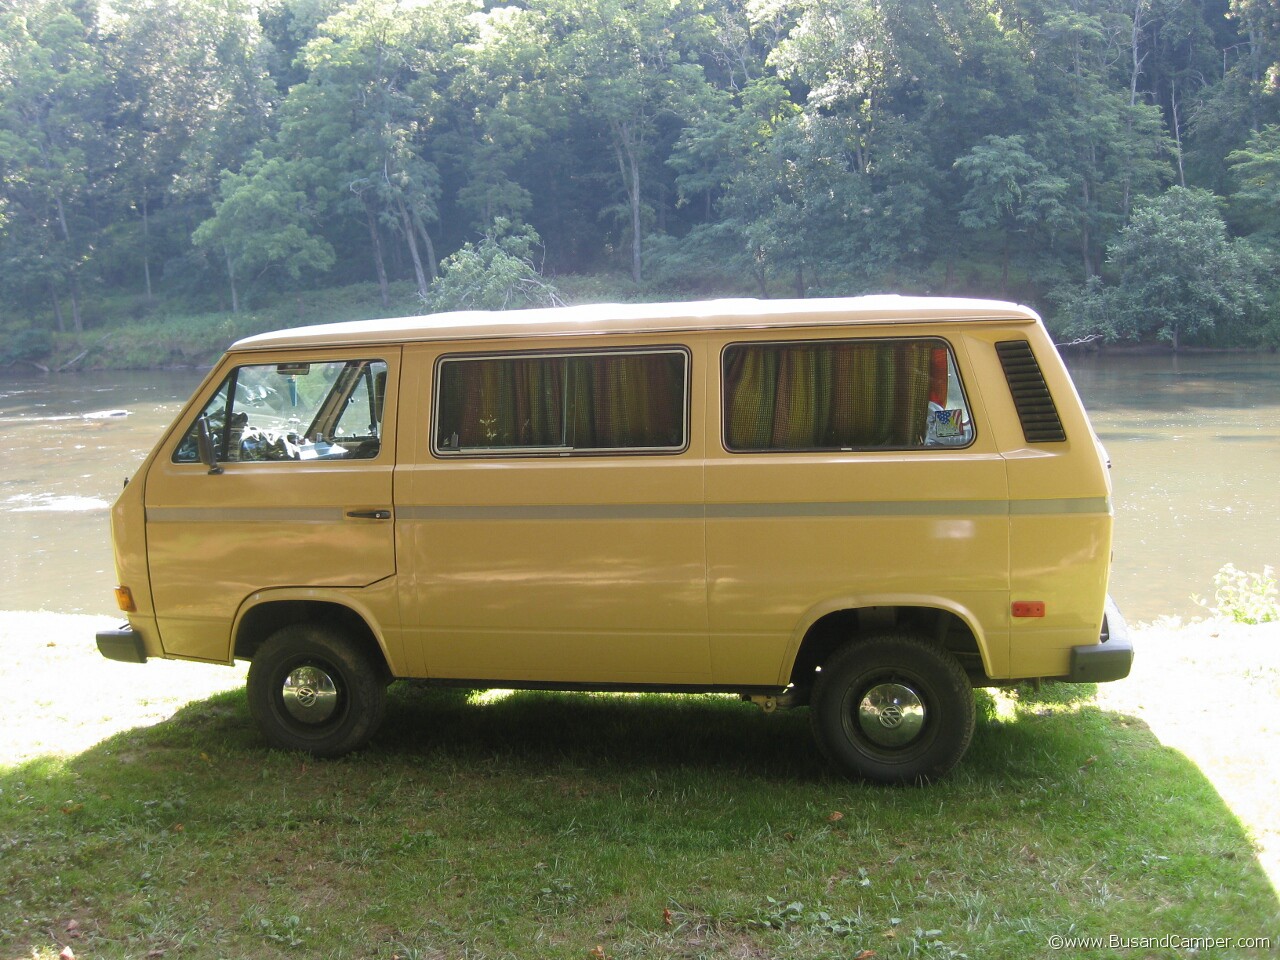 Clean early campervan in yellow